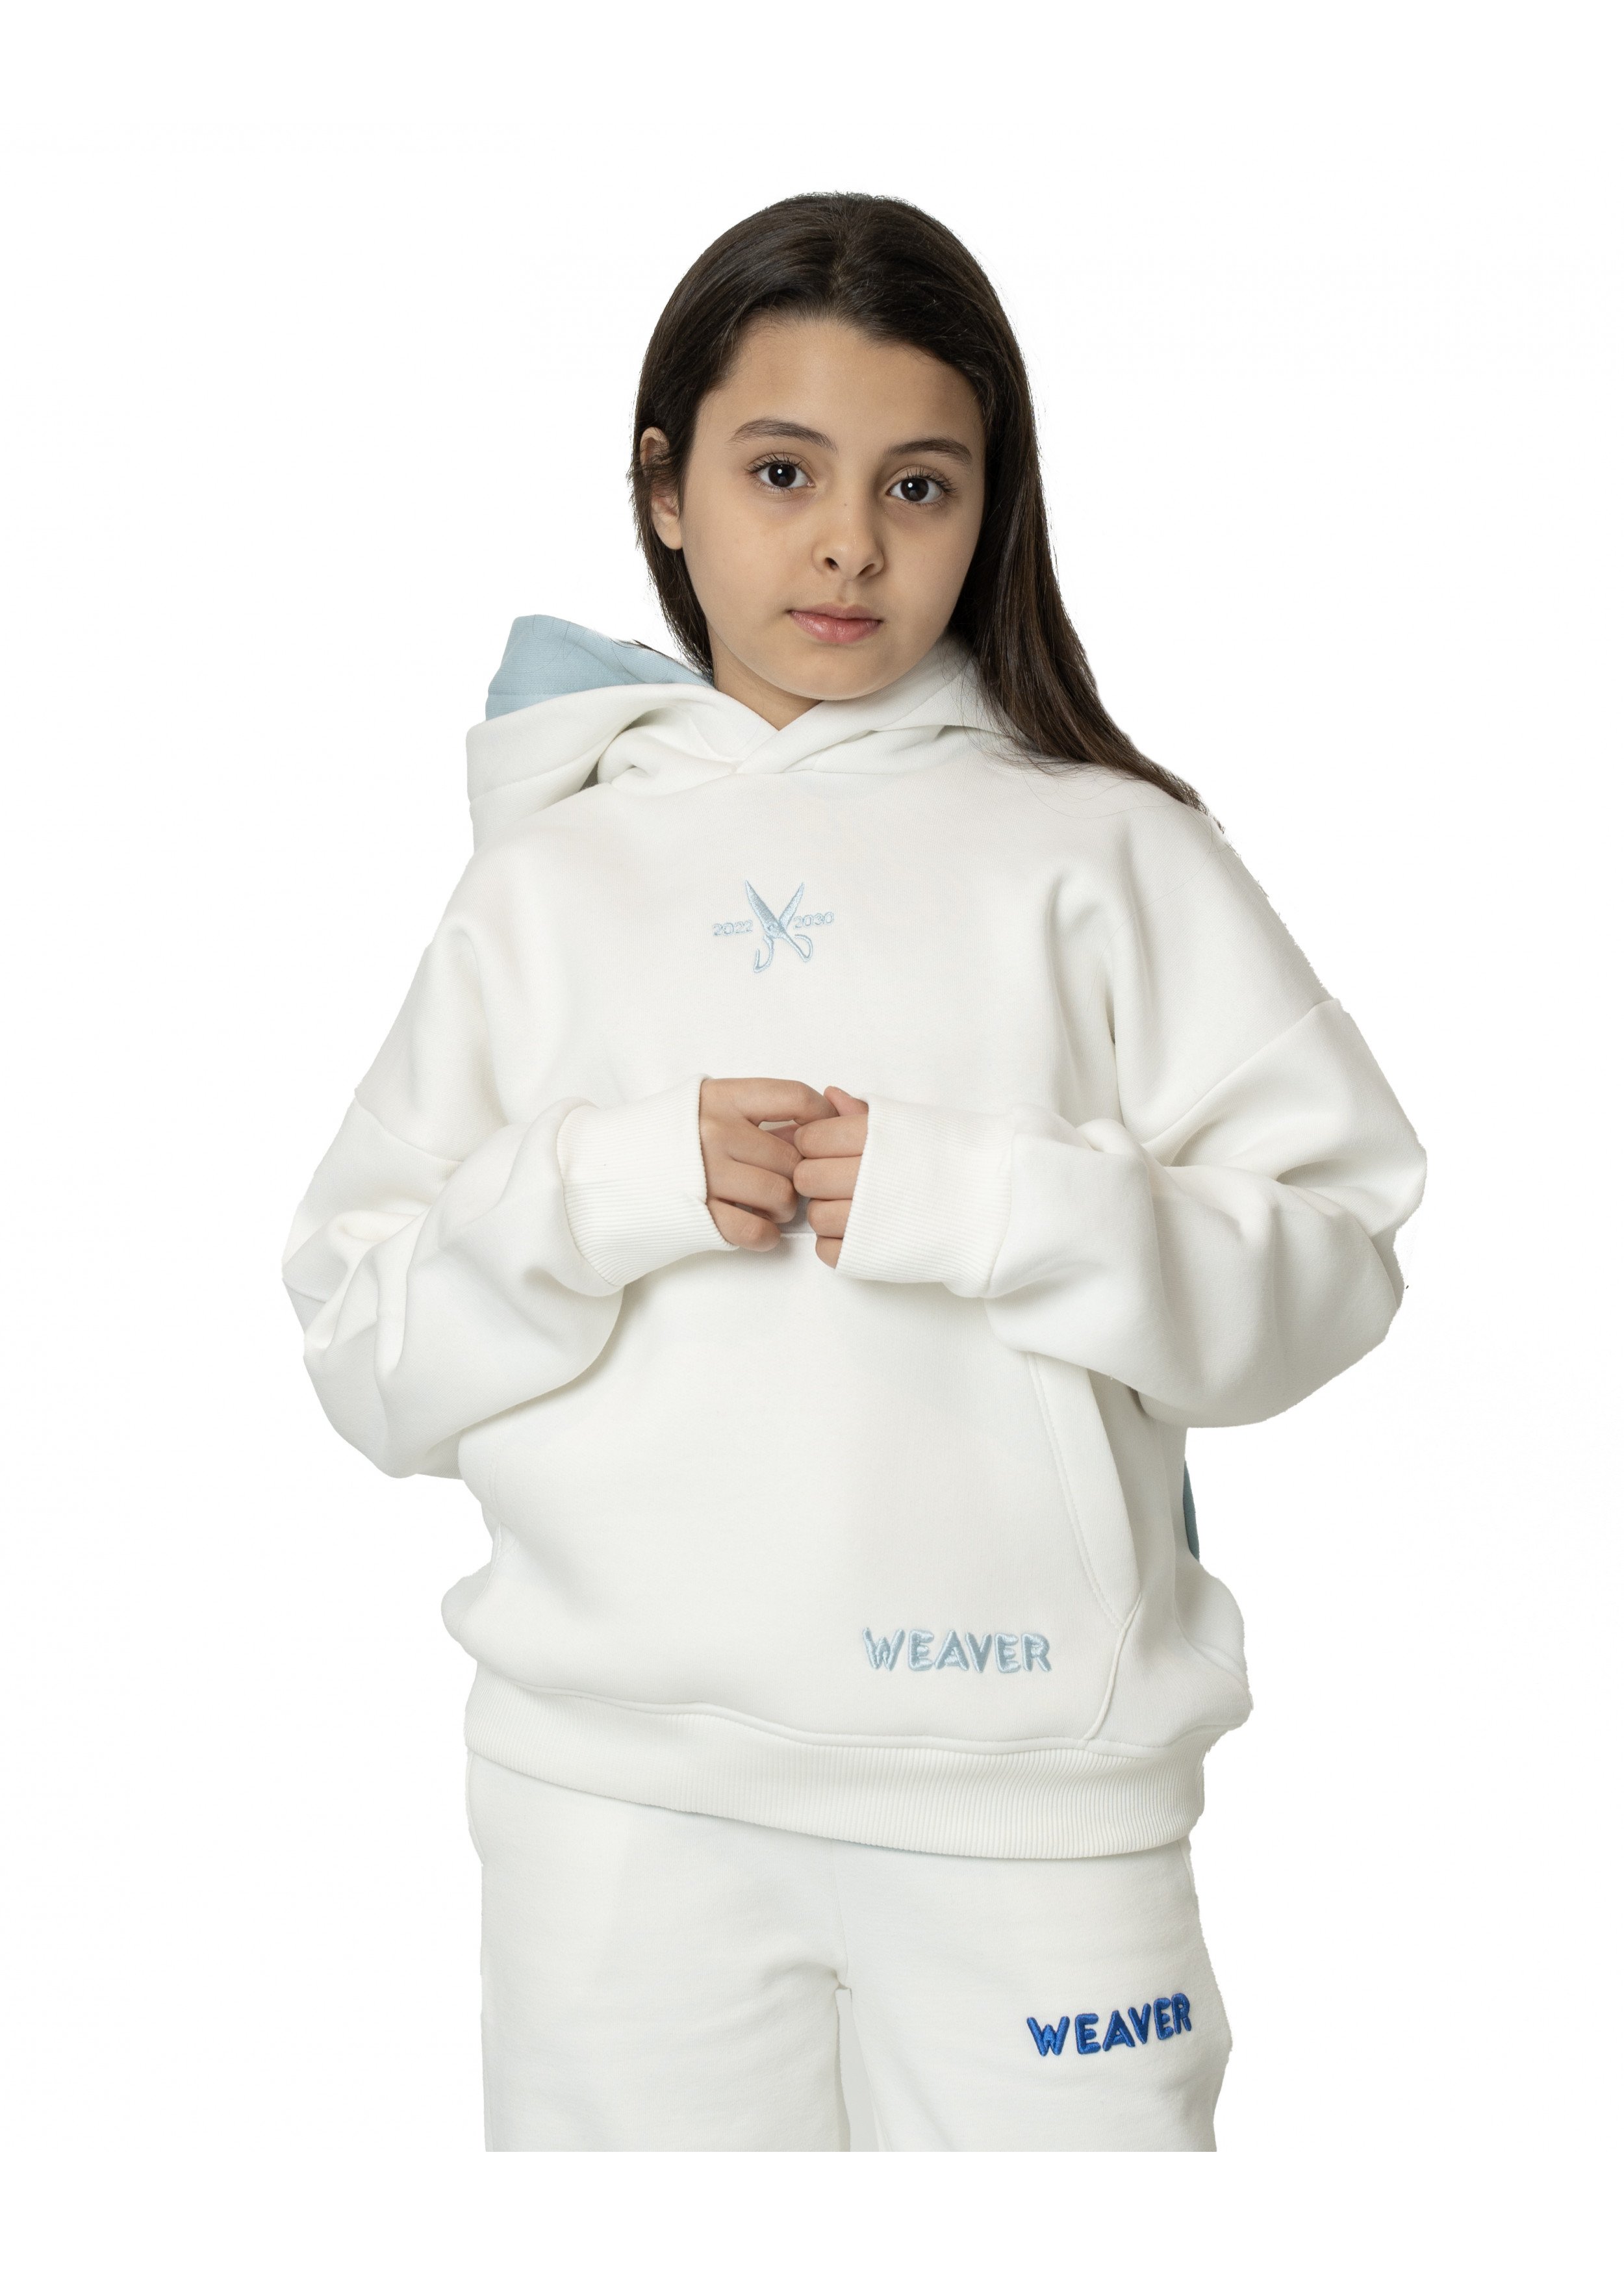 Kids Double Hoodie White/ Baby blue